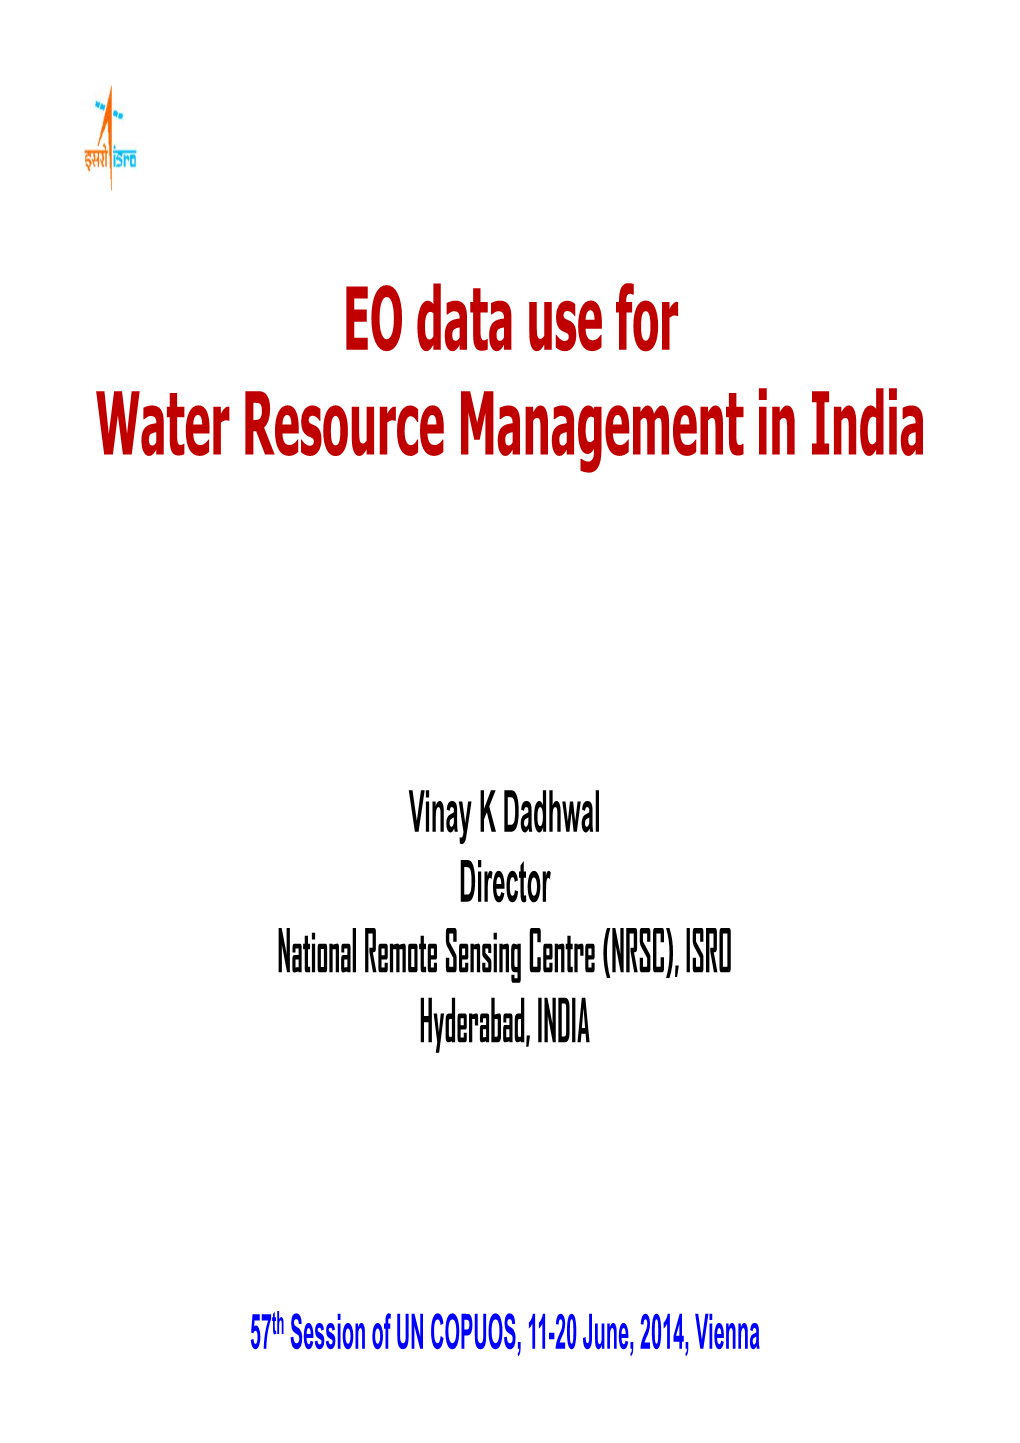 EO Data Use for Water Resource Management in India